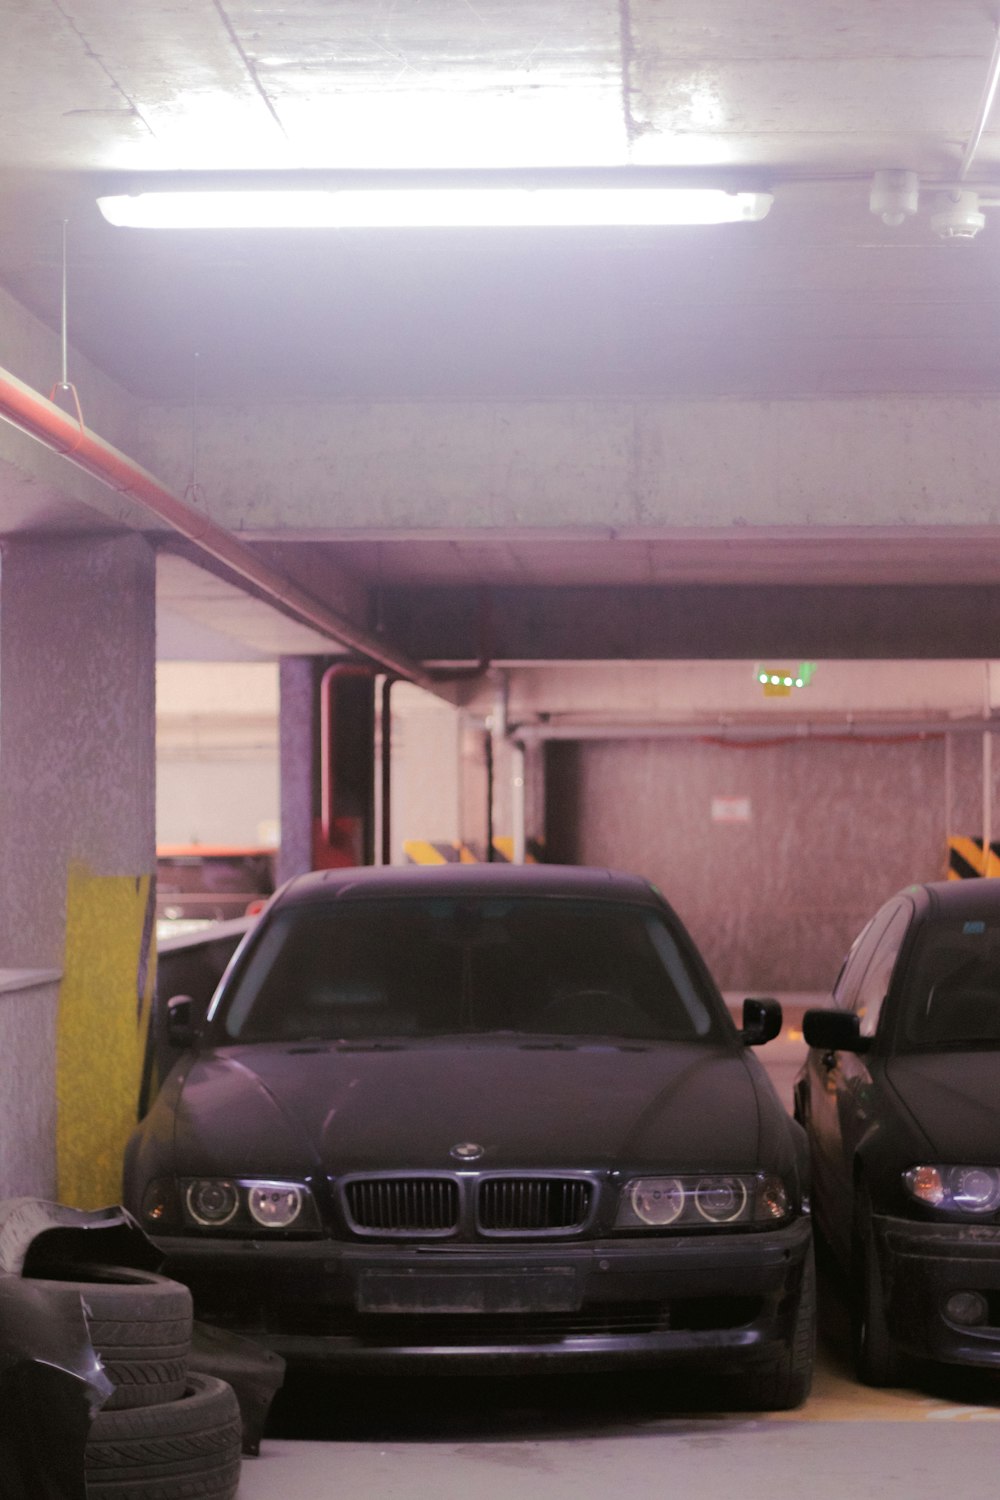 a parking garage with two cars parked in it